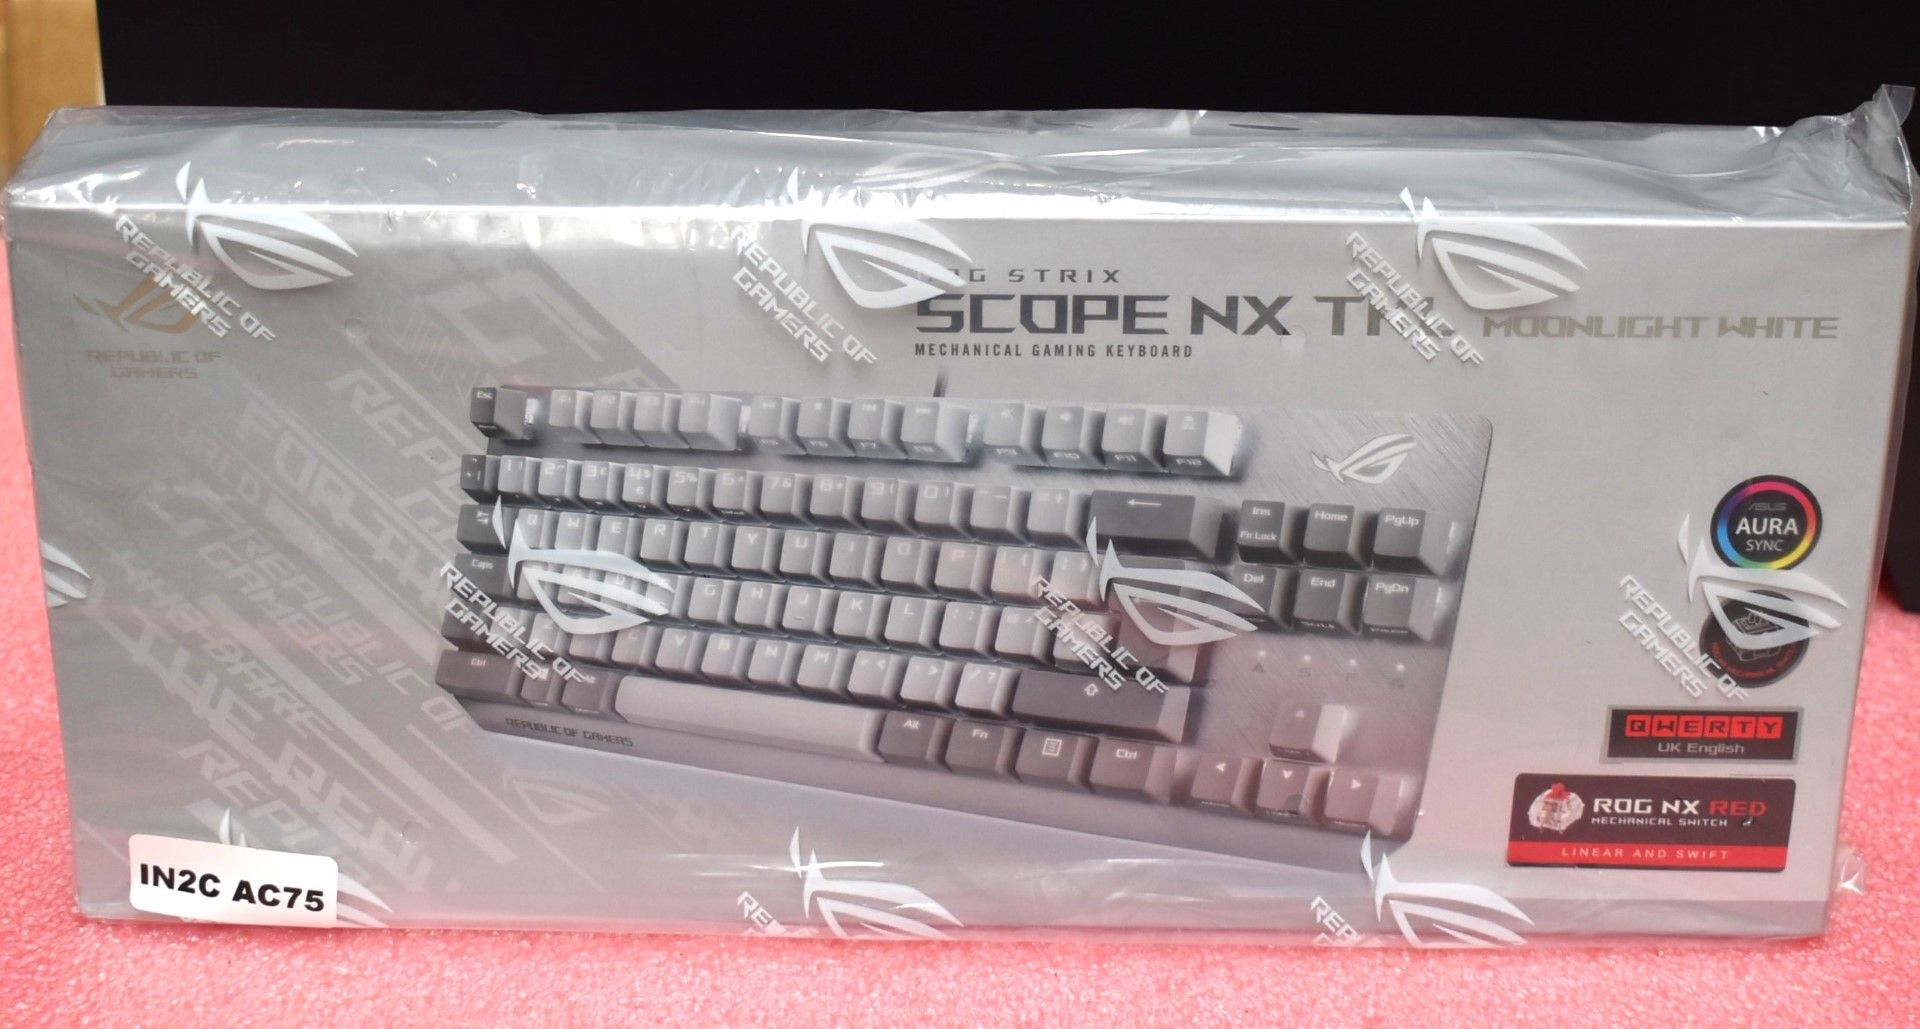 1 x Asus ROG Strix Scope NX TKL Moonlight White Wired Mechanical RGB Gaming Keyboard - Features - Image 2 of 6